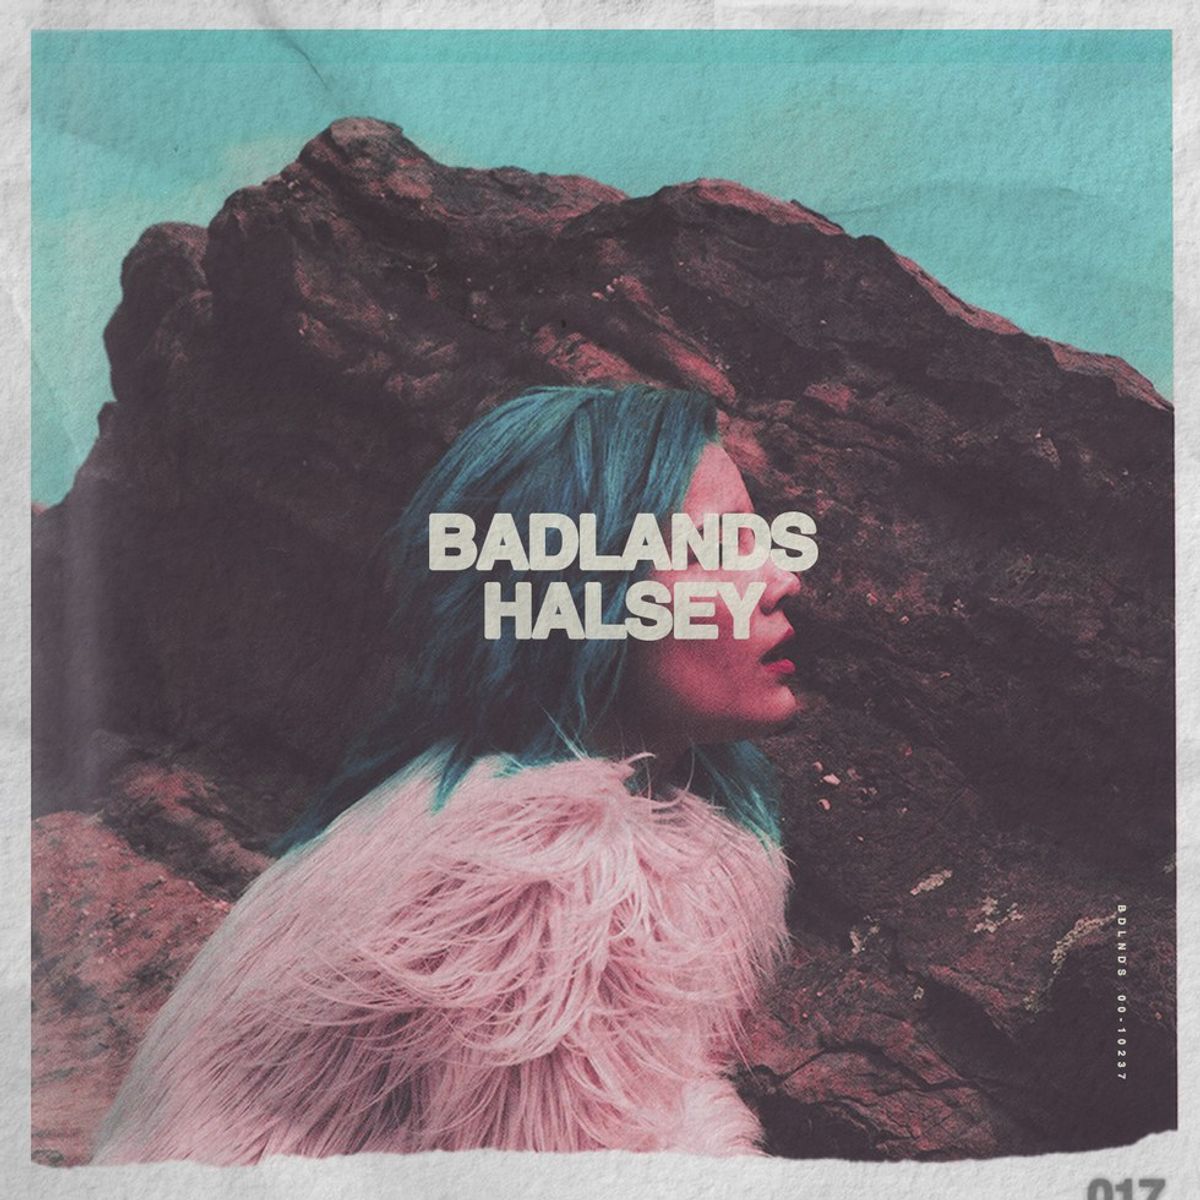 Upcoming, Close, And Personal: A Review of Halsey's Debut Album 'Badlands'